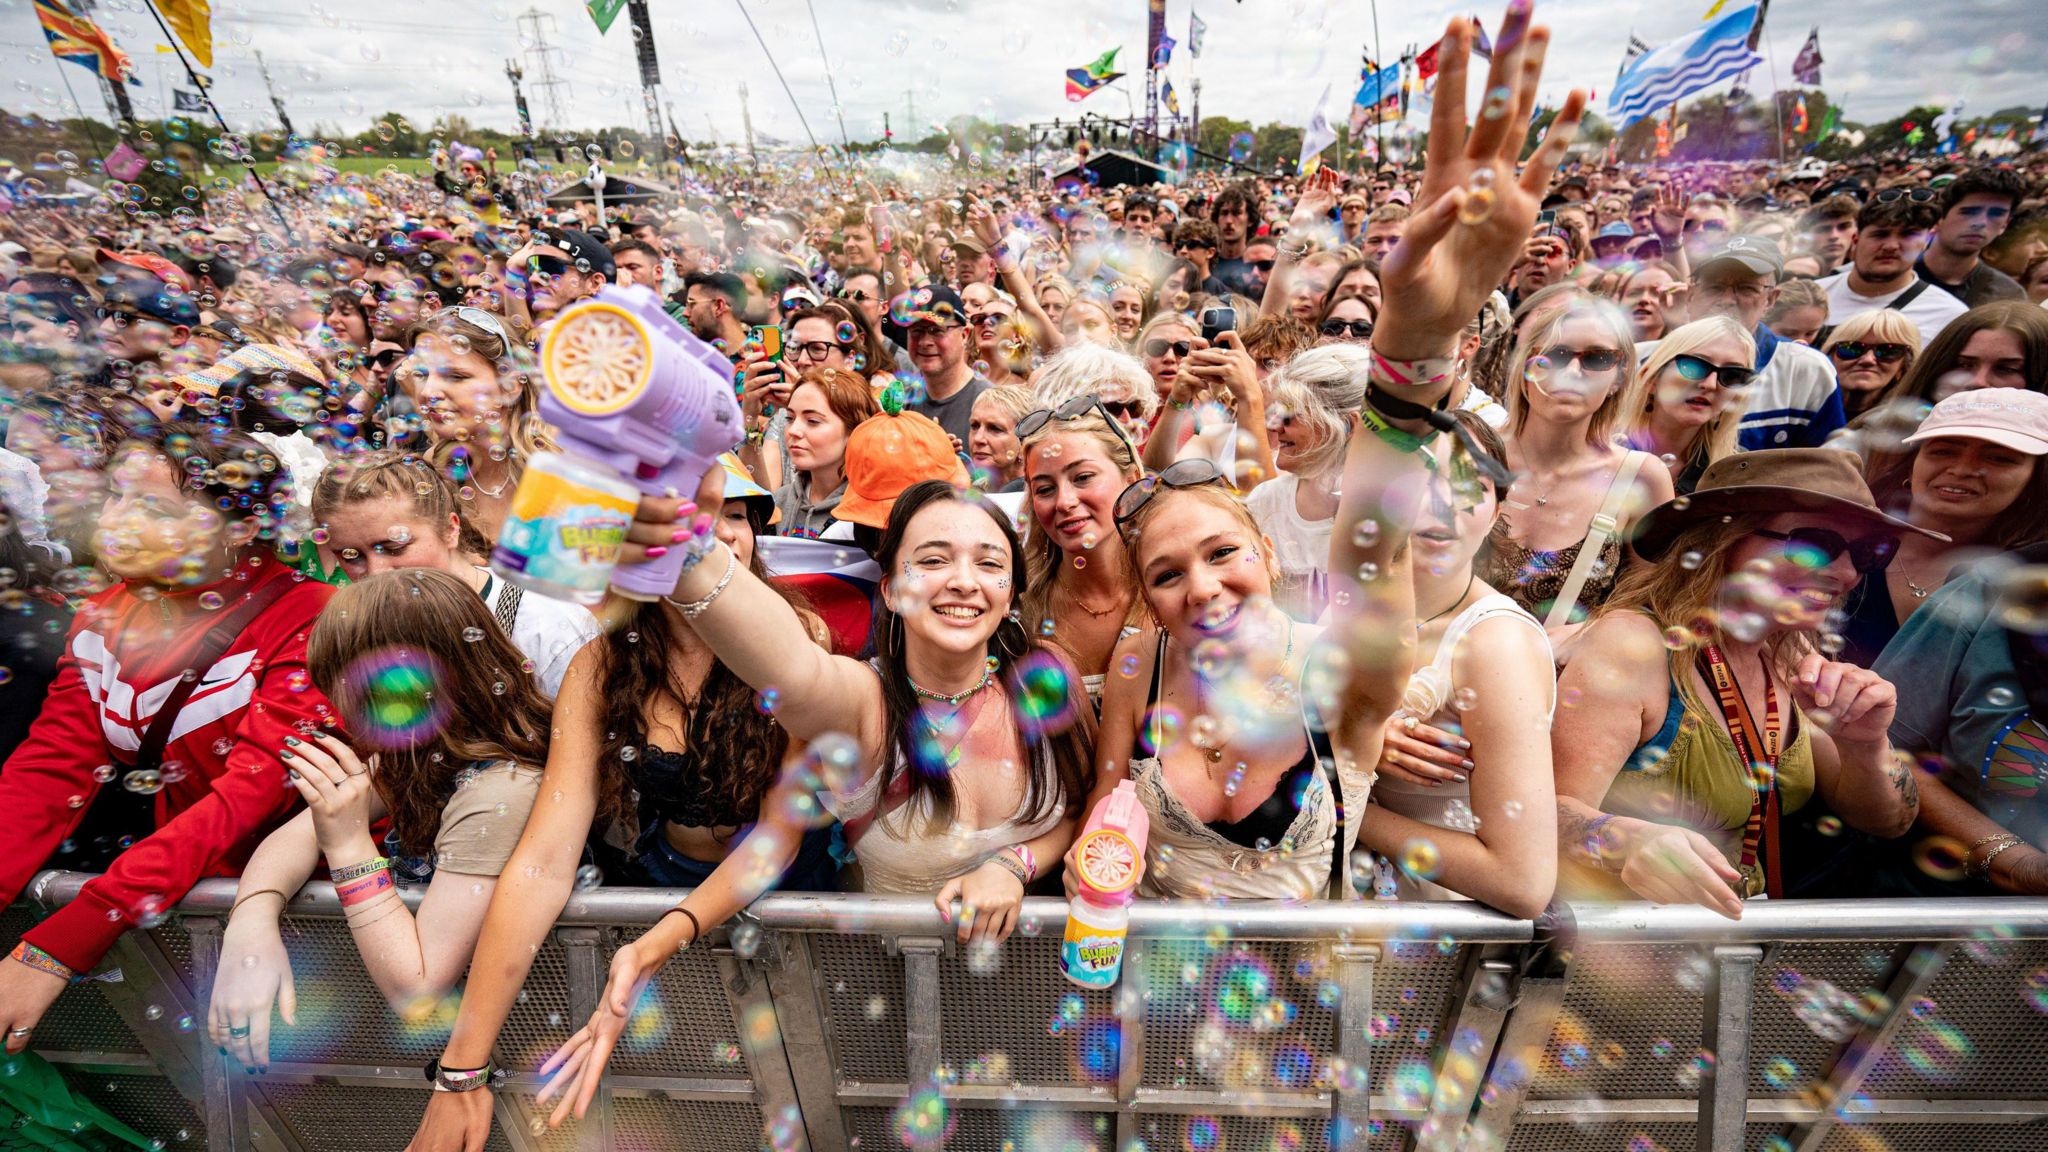 Music fans in a large crowd blow bubbles by the Pyramid stage